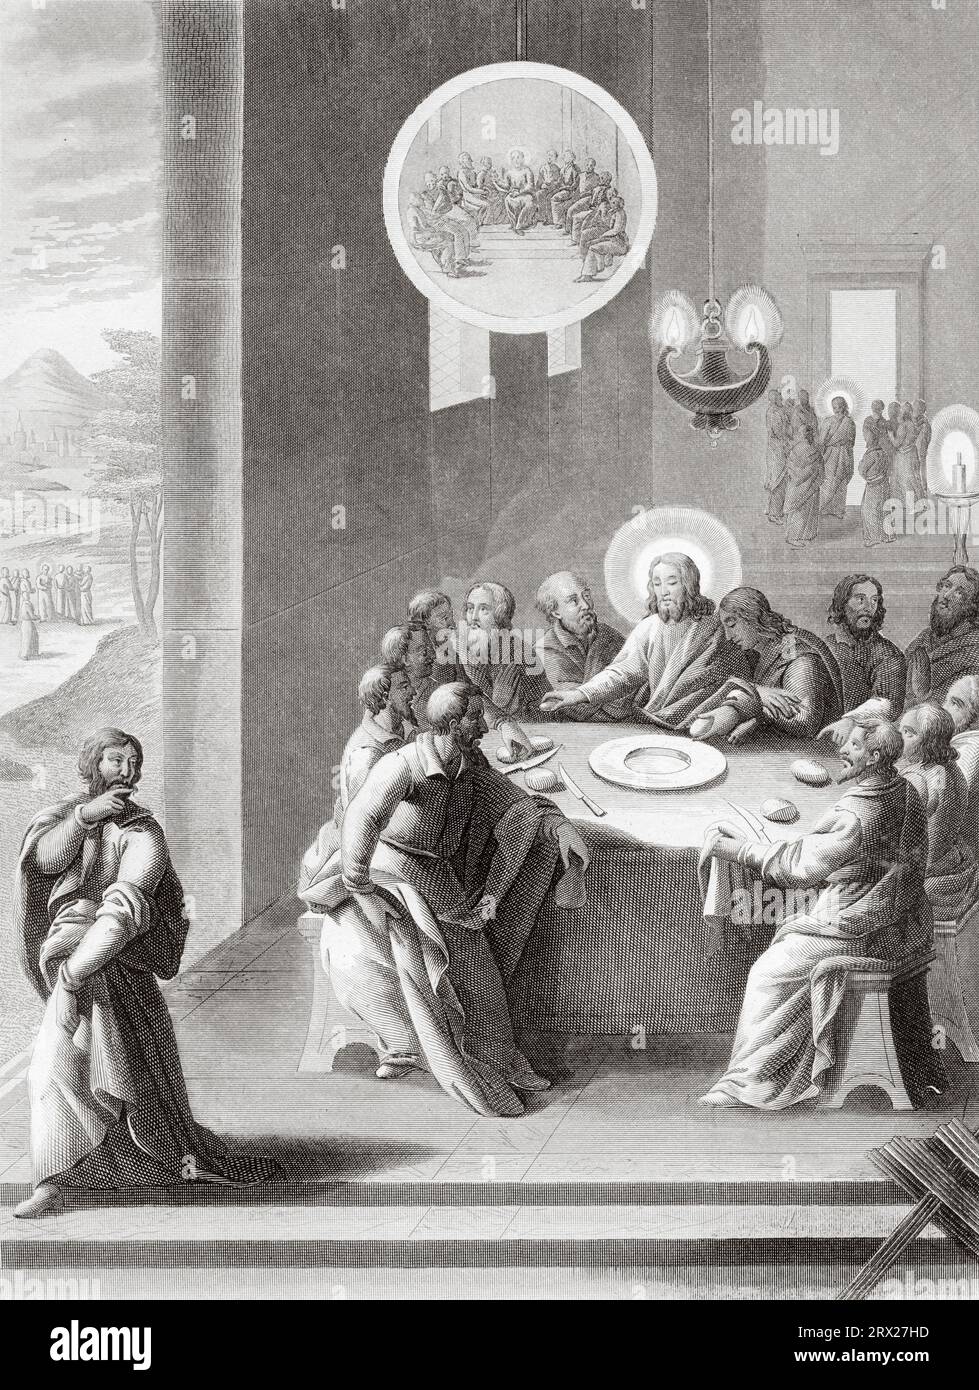 The Last Supper, Judas goes out to complete his betrayal of Jesus. Illustration for The life of Our Lord Jesus Christ written by the four evangelists, 1853 Stock Photo